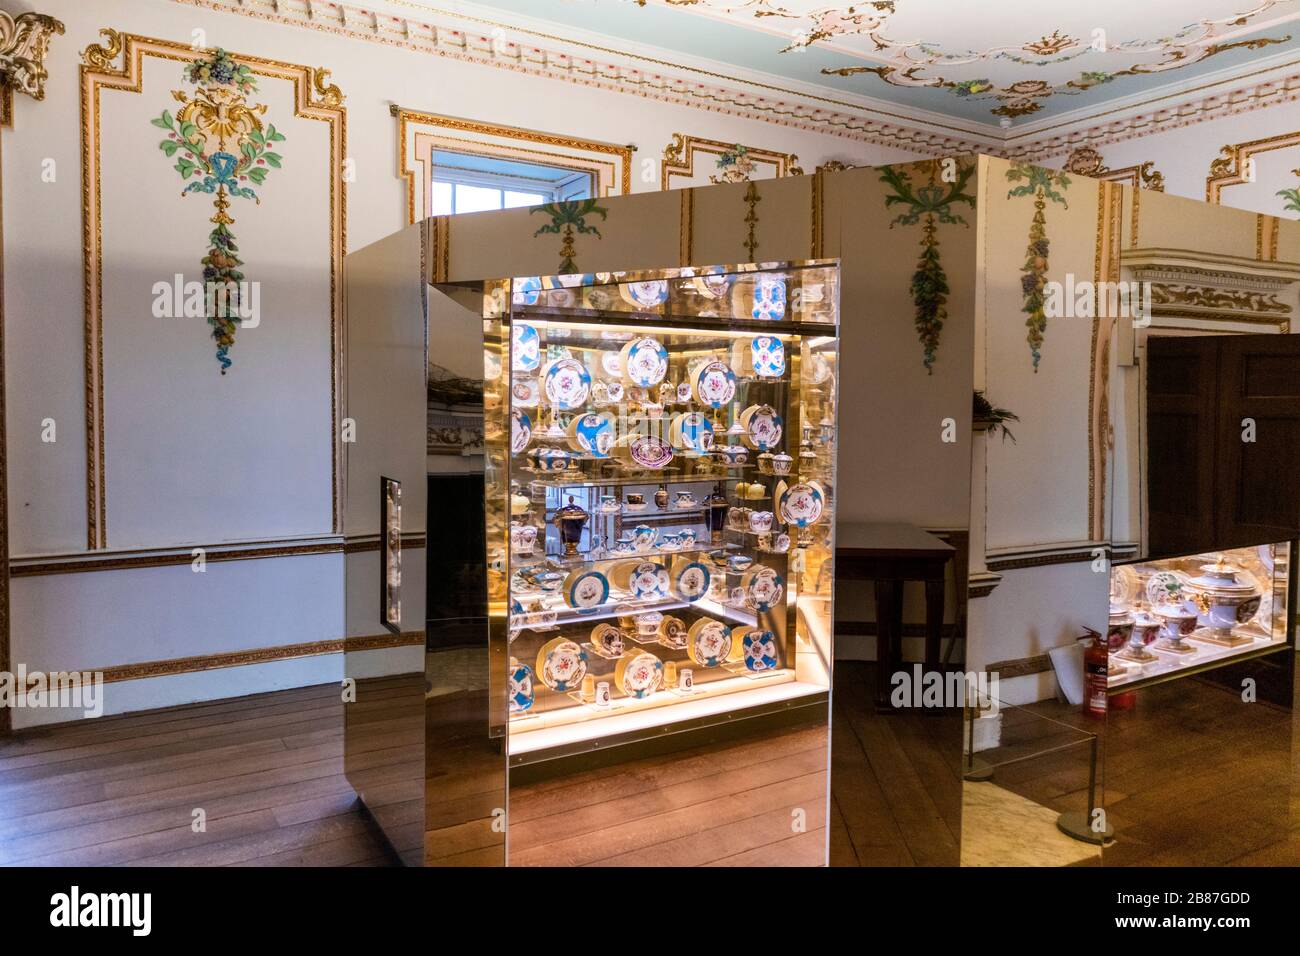 Display of porcelain at Croome Court, Worcestershire UK Stock Photo